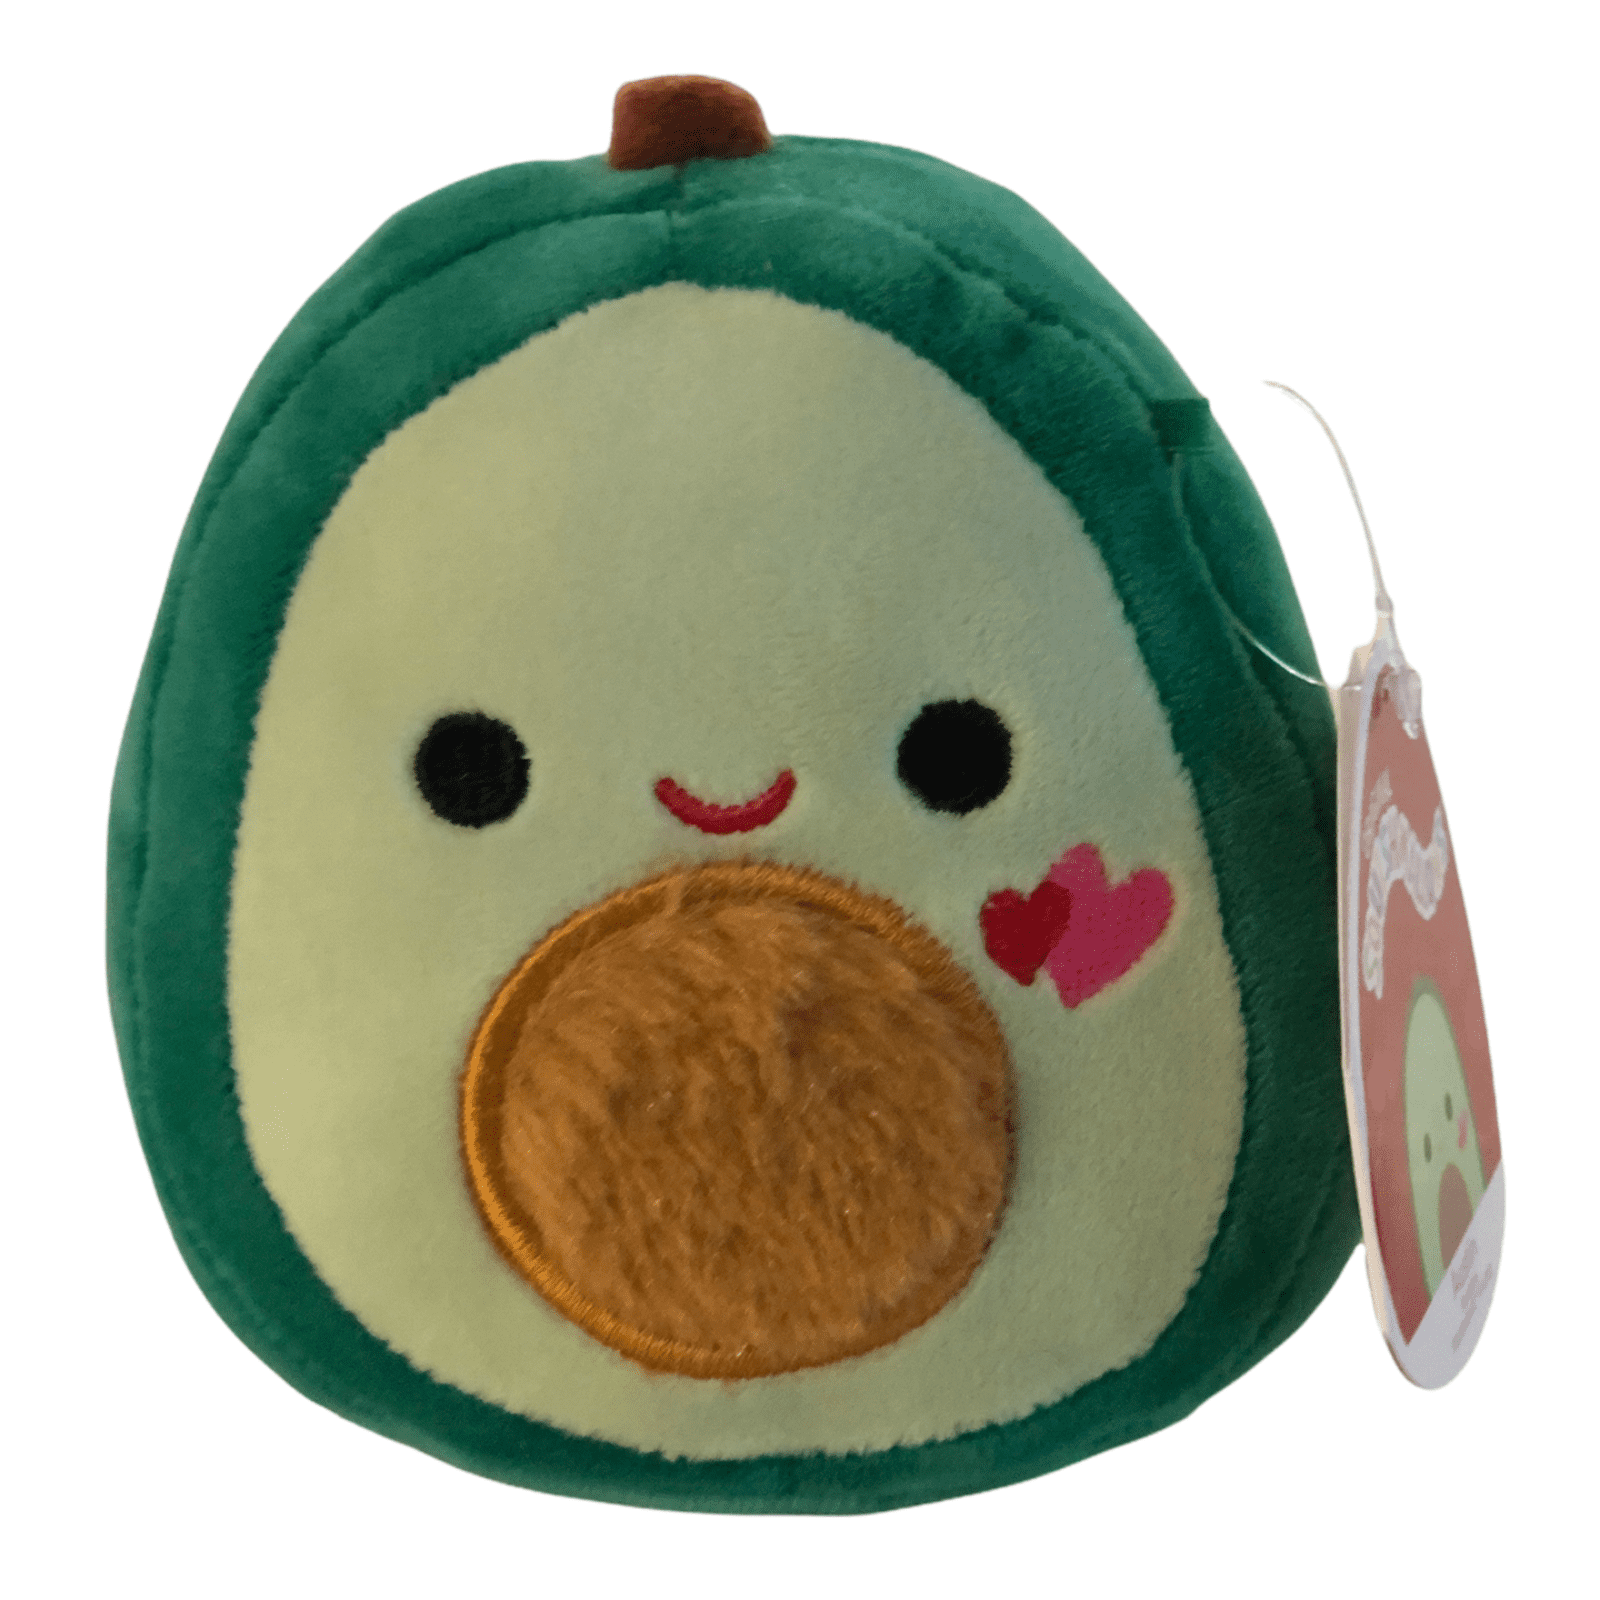 Squishmallows Austin The Avocado 2021 Valentines Day Kellytoy Plush 8"inch for sale online 